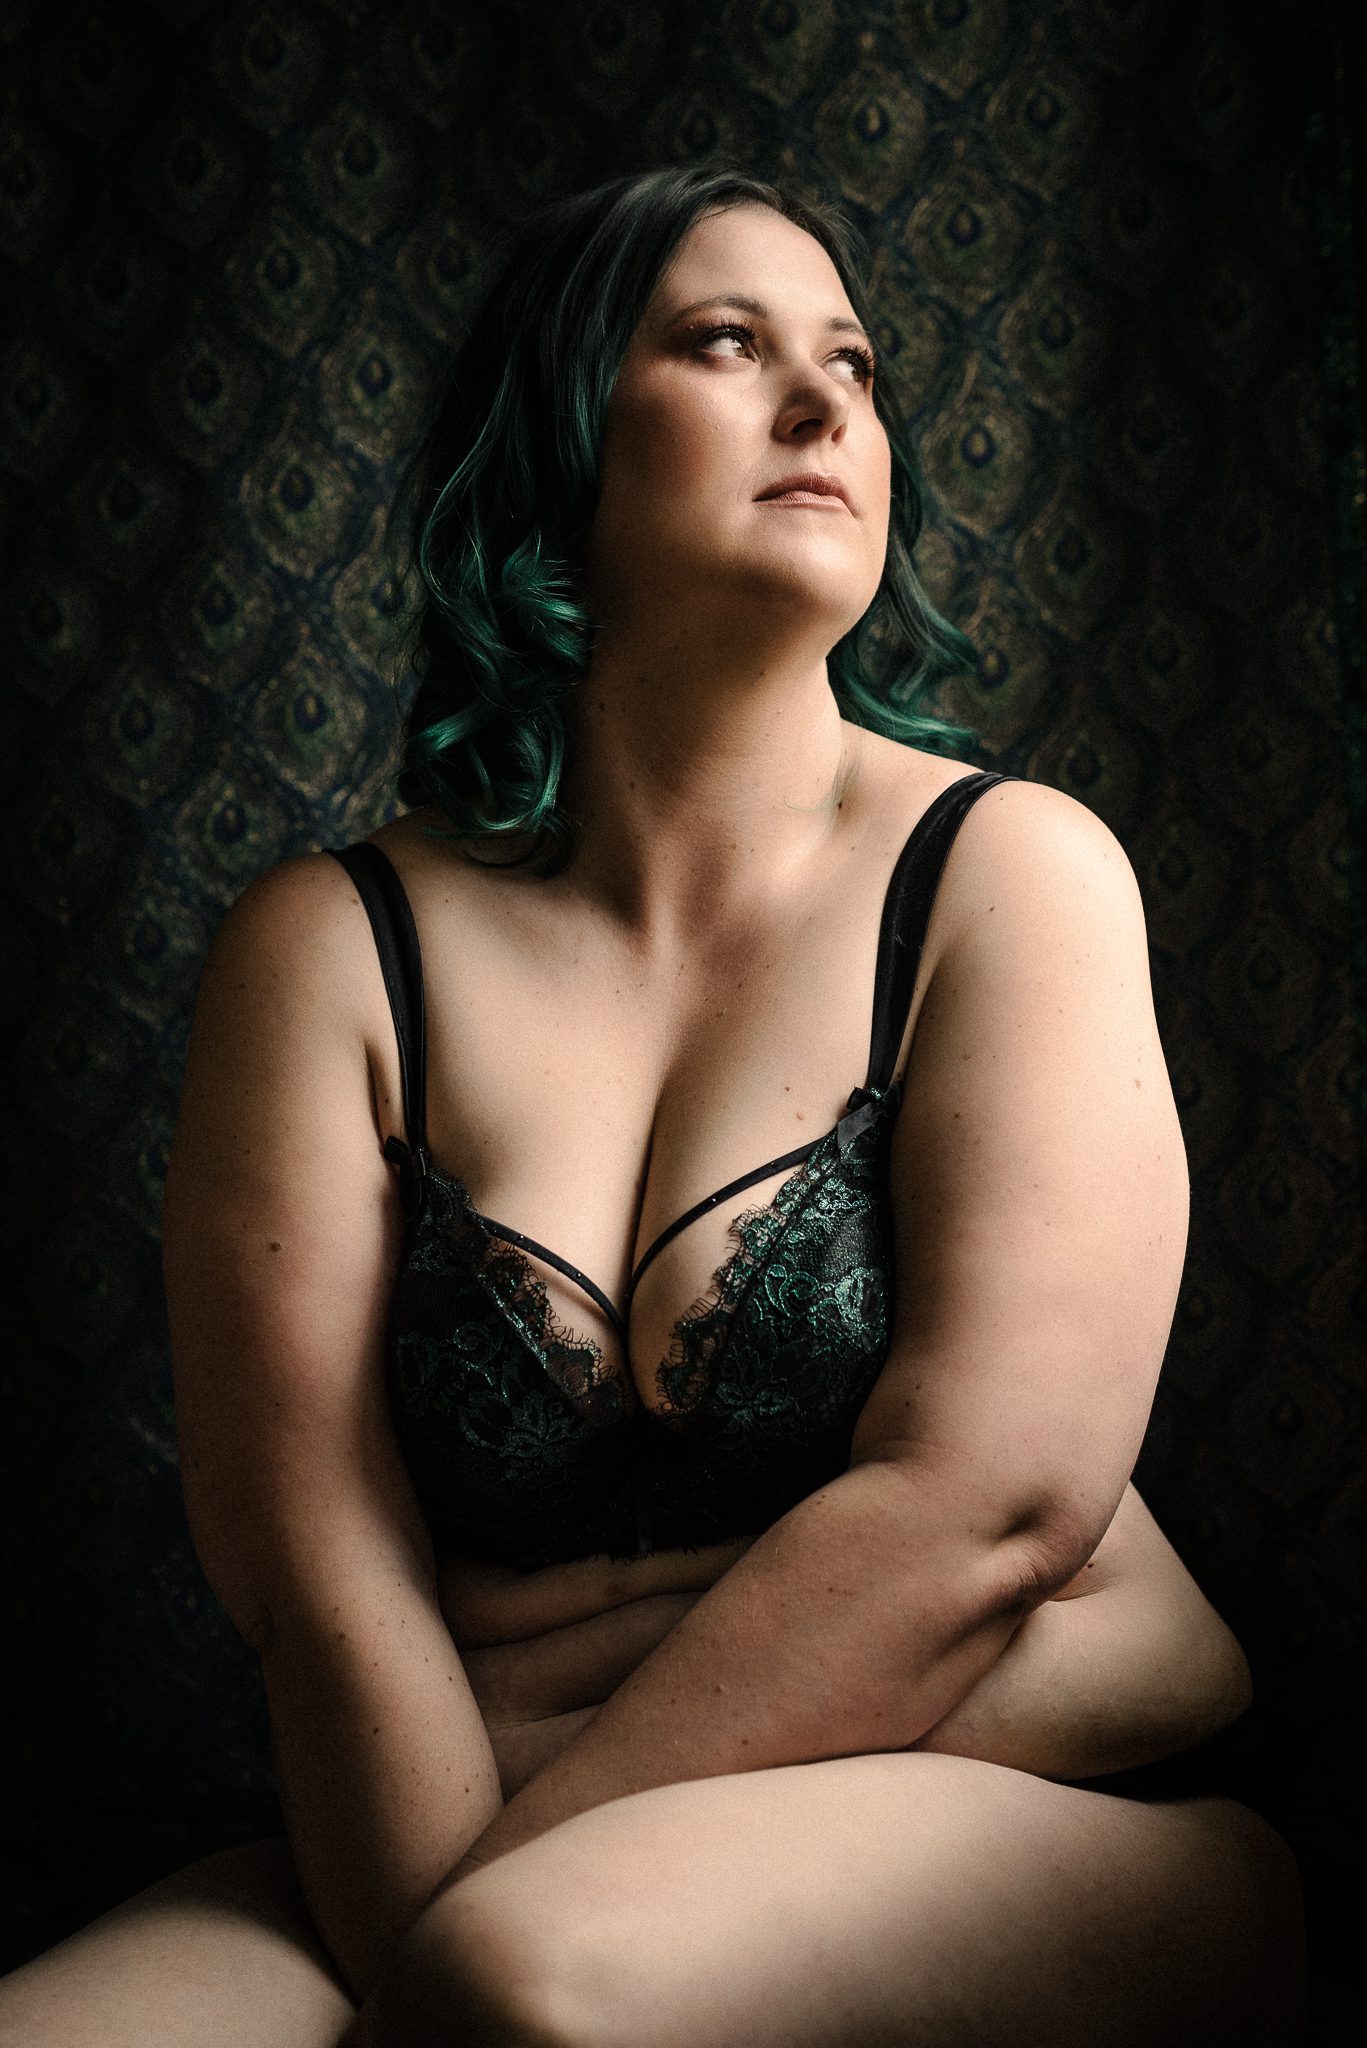 Boudoir photo of a lady with green hair against a peacock backdrop